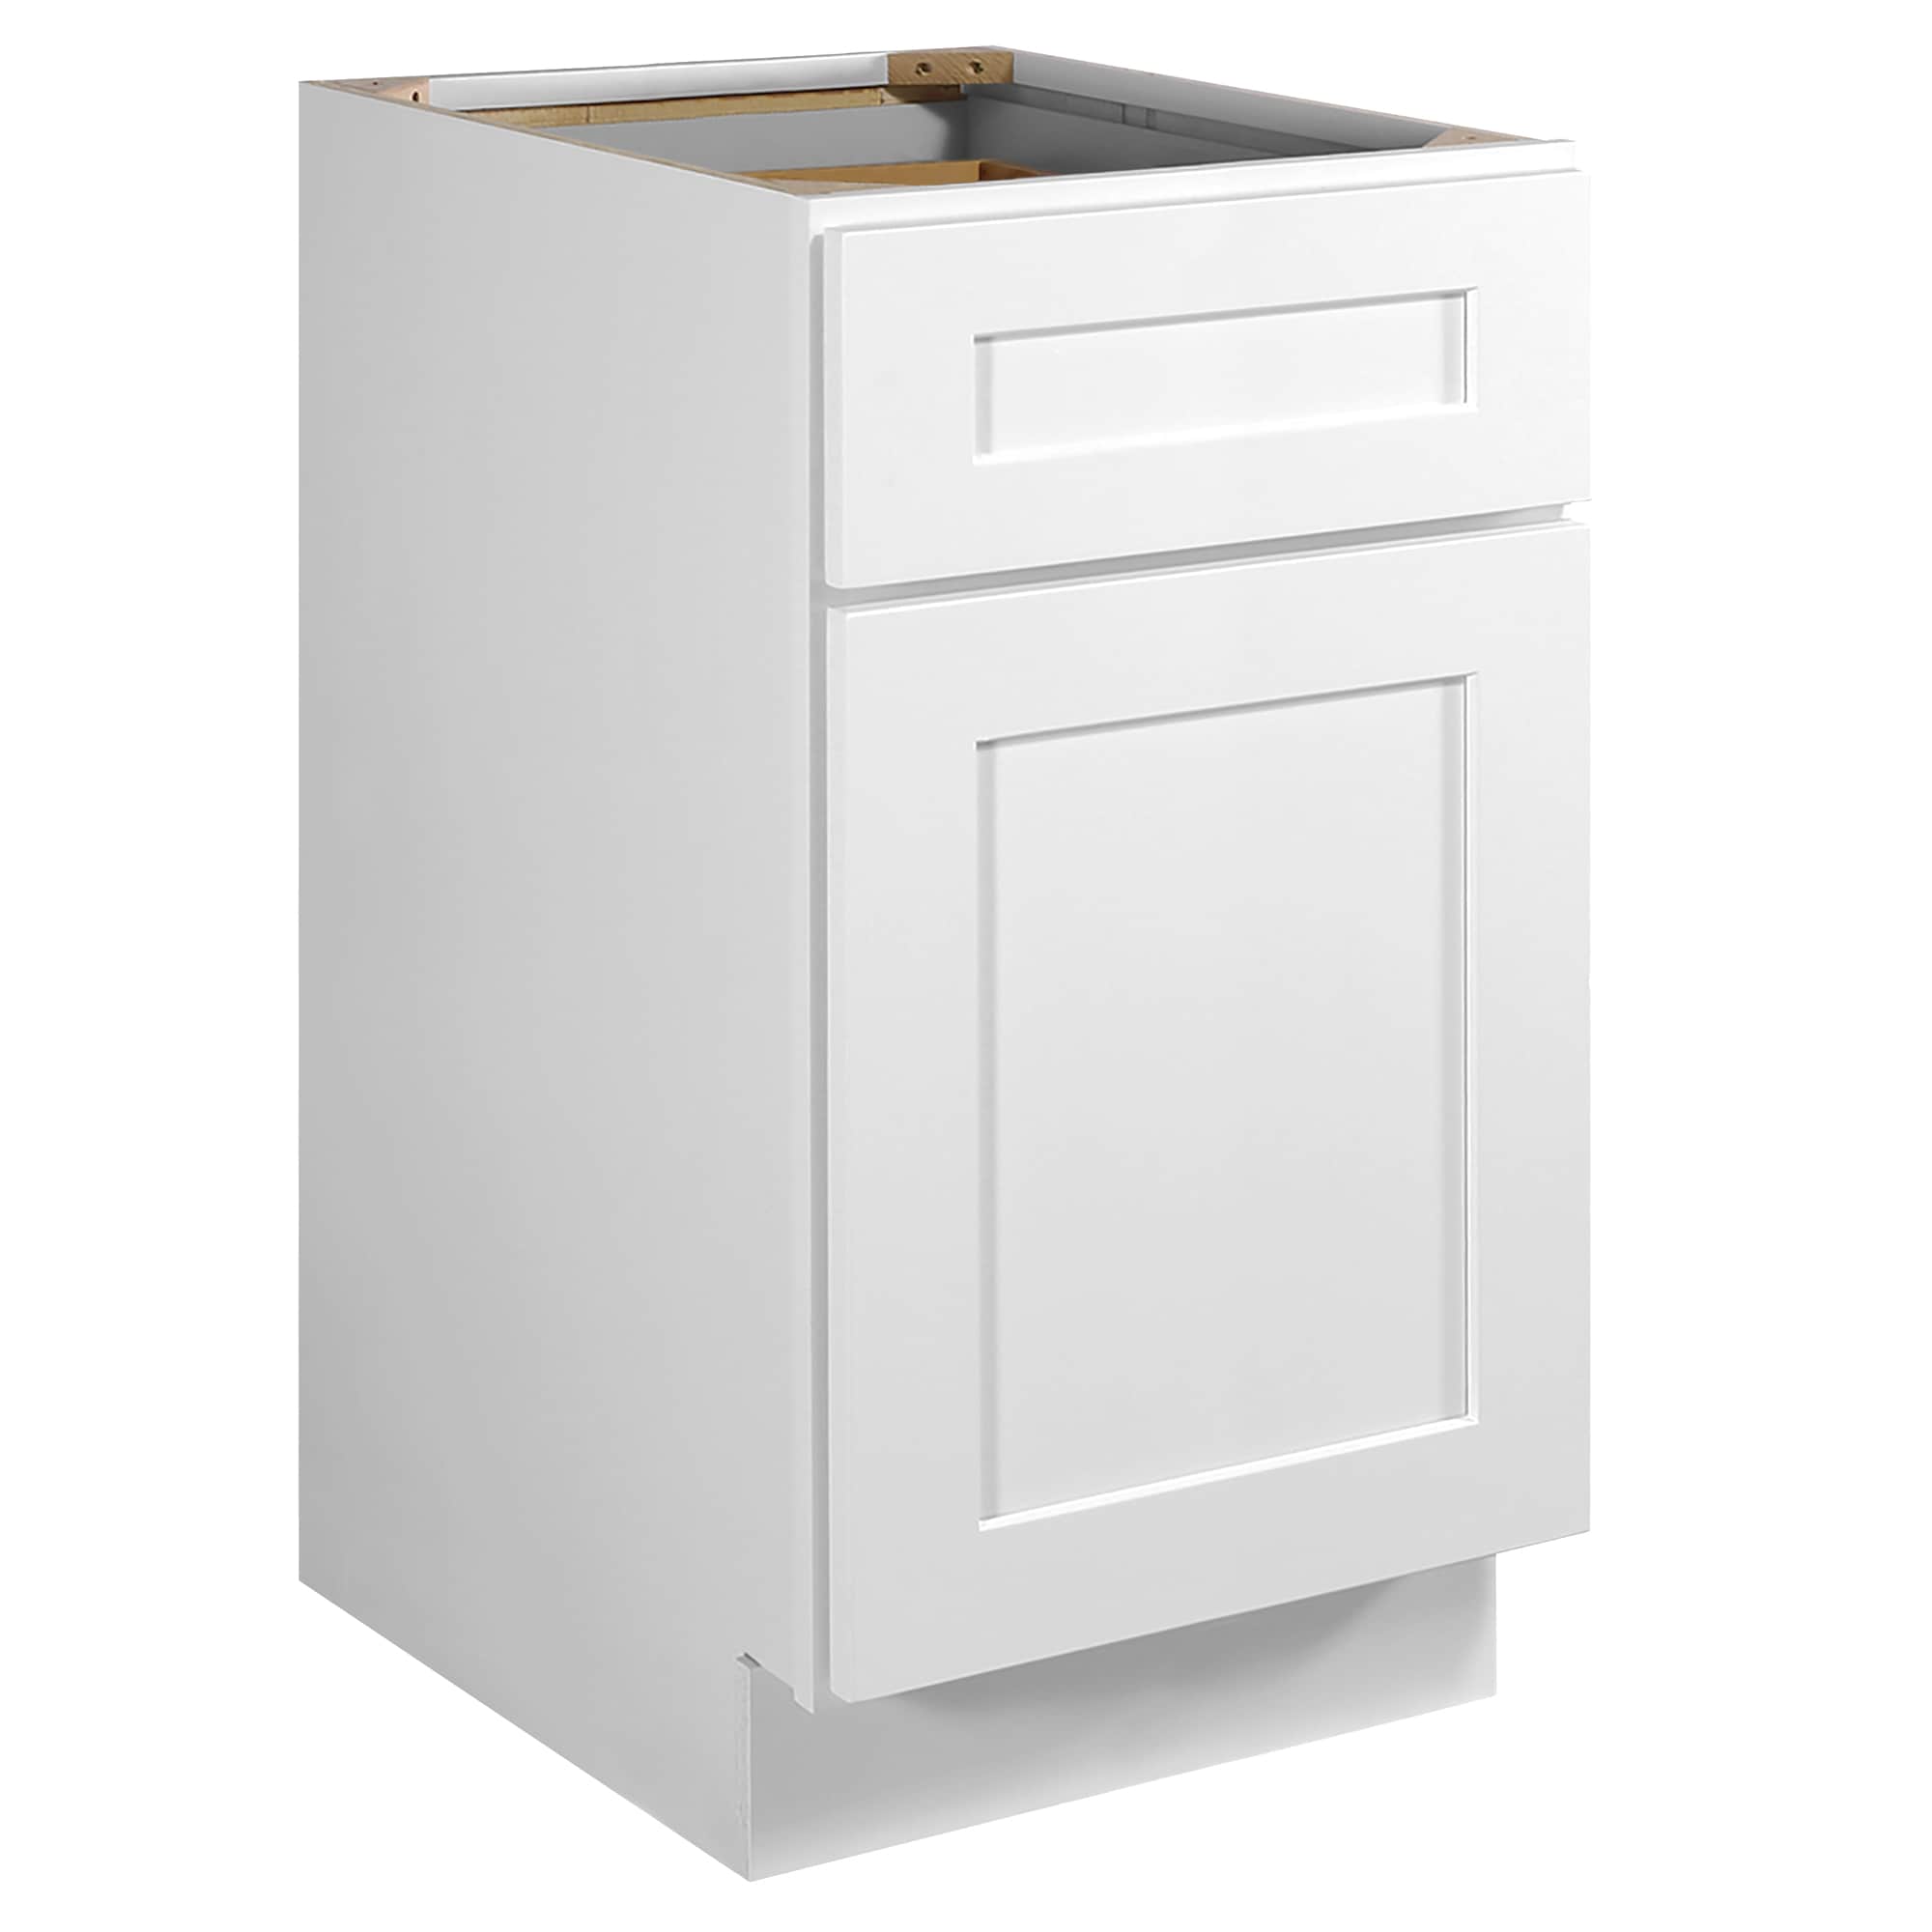 L-shaped Kitchen Cabinets at Lowes.com